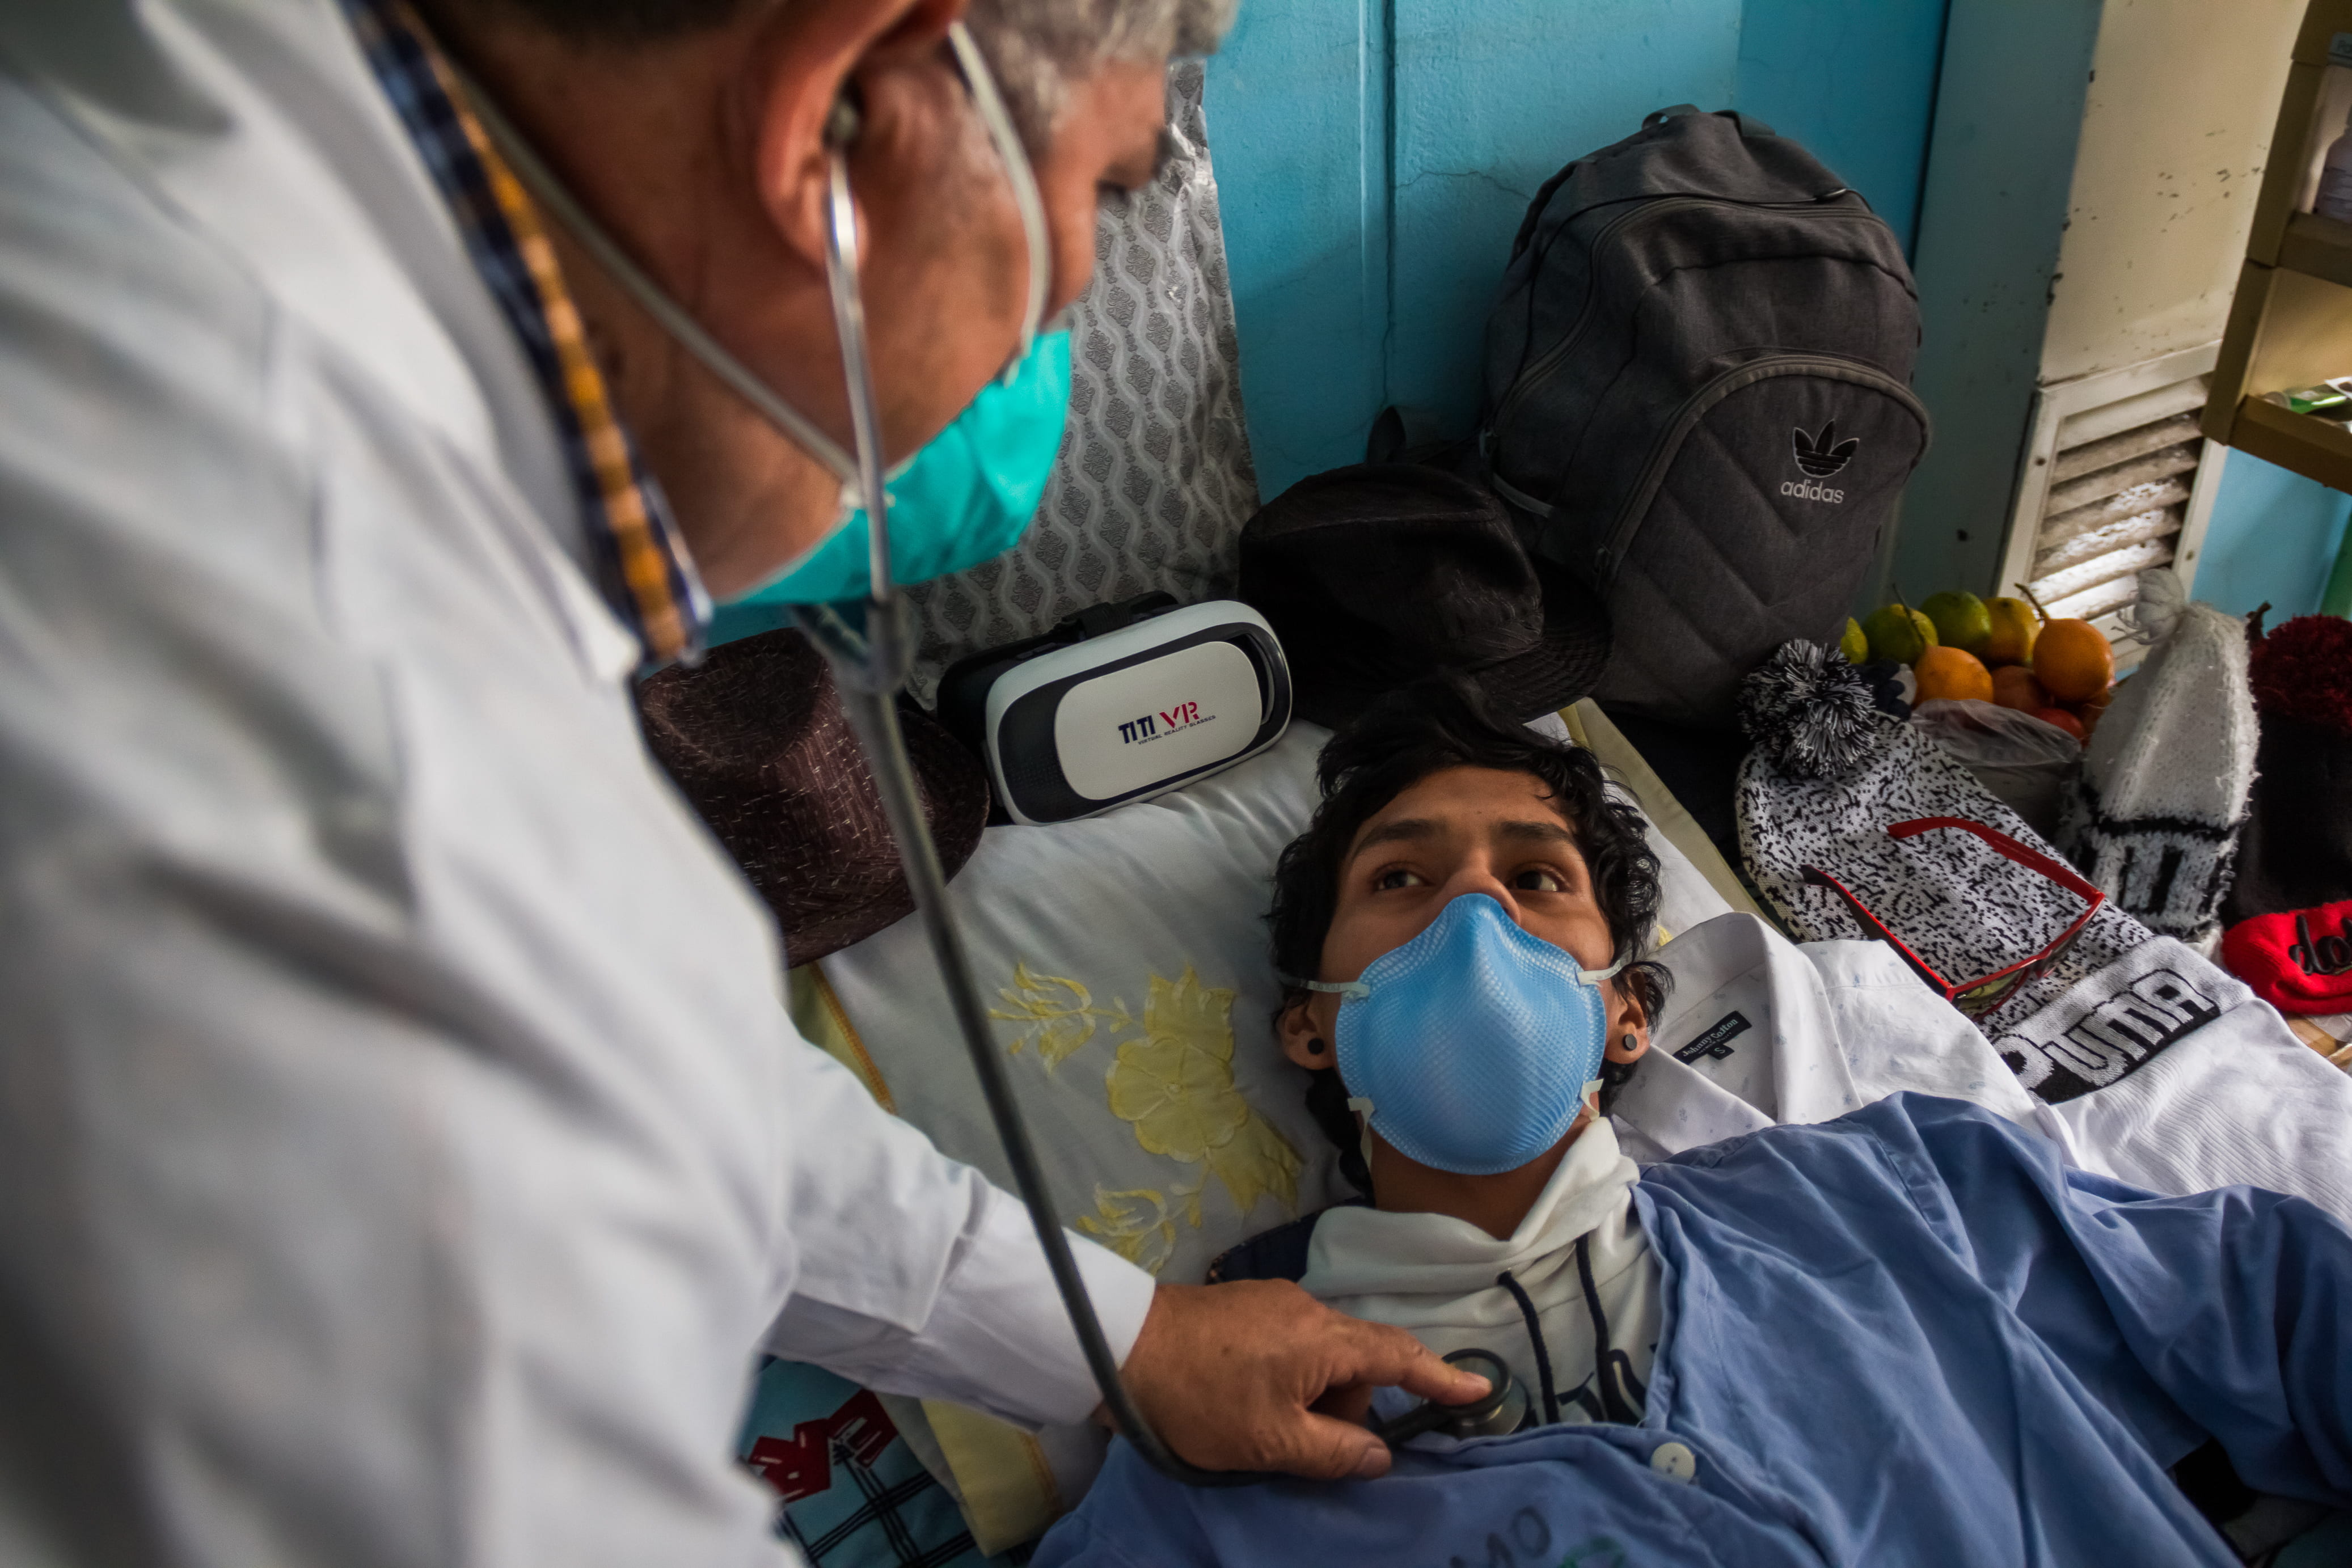 Doctor caring for patient at bedside in Peru hospital